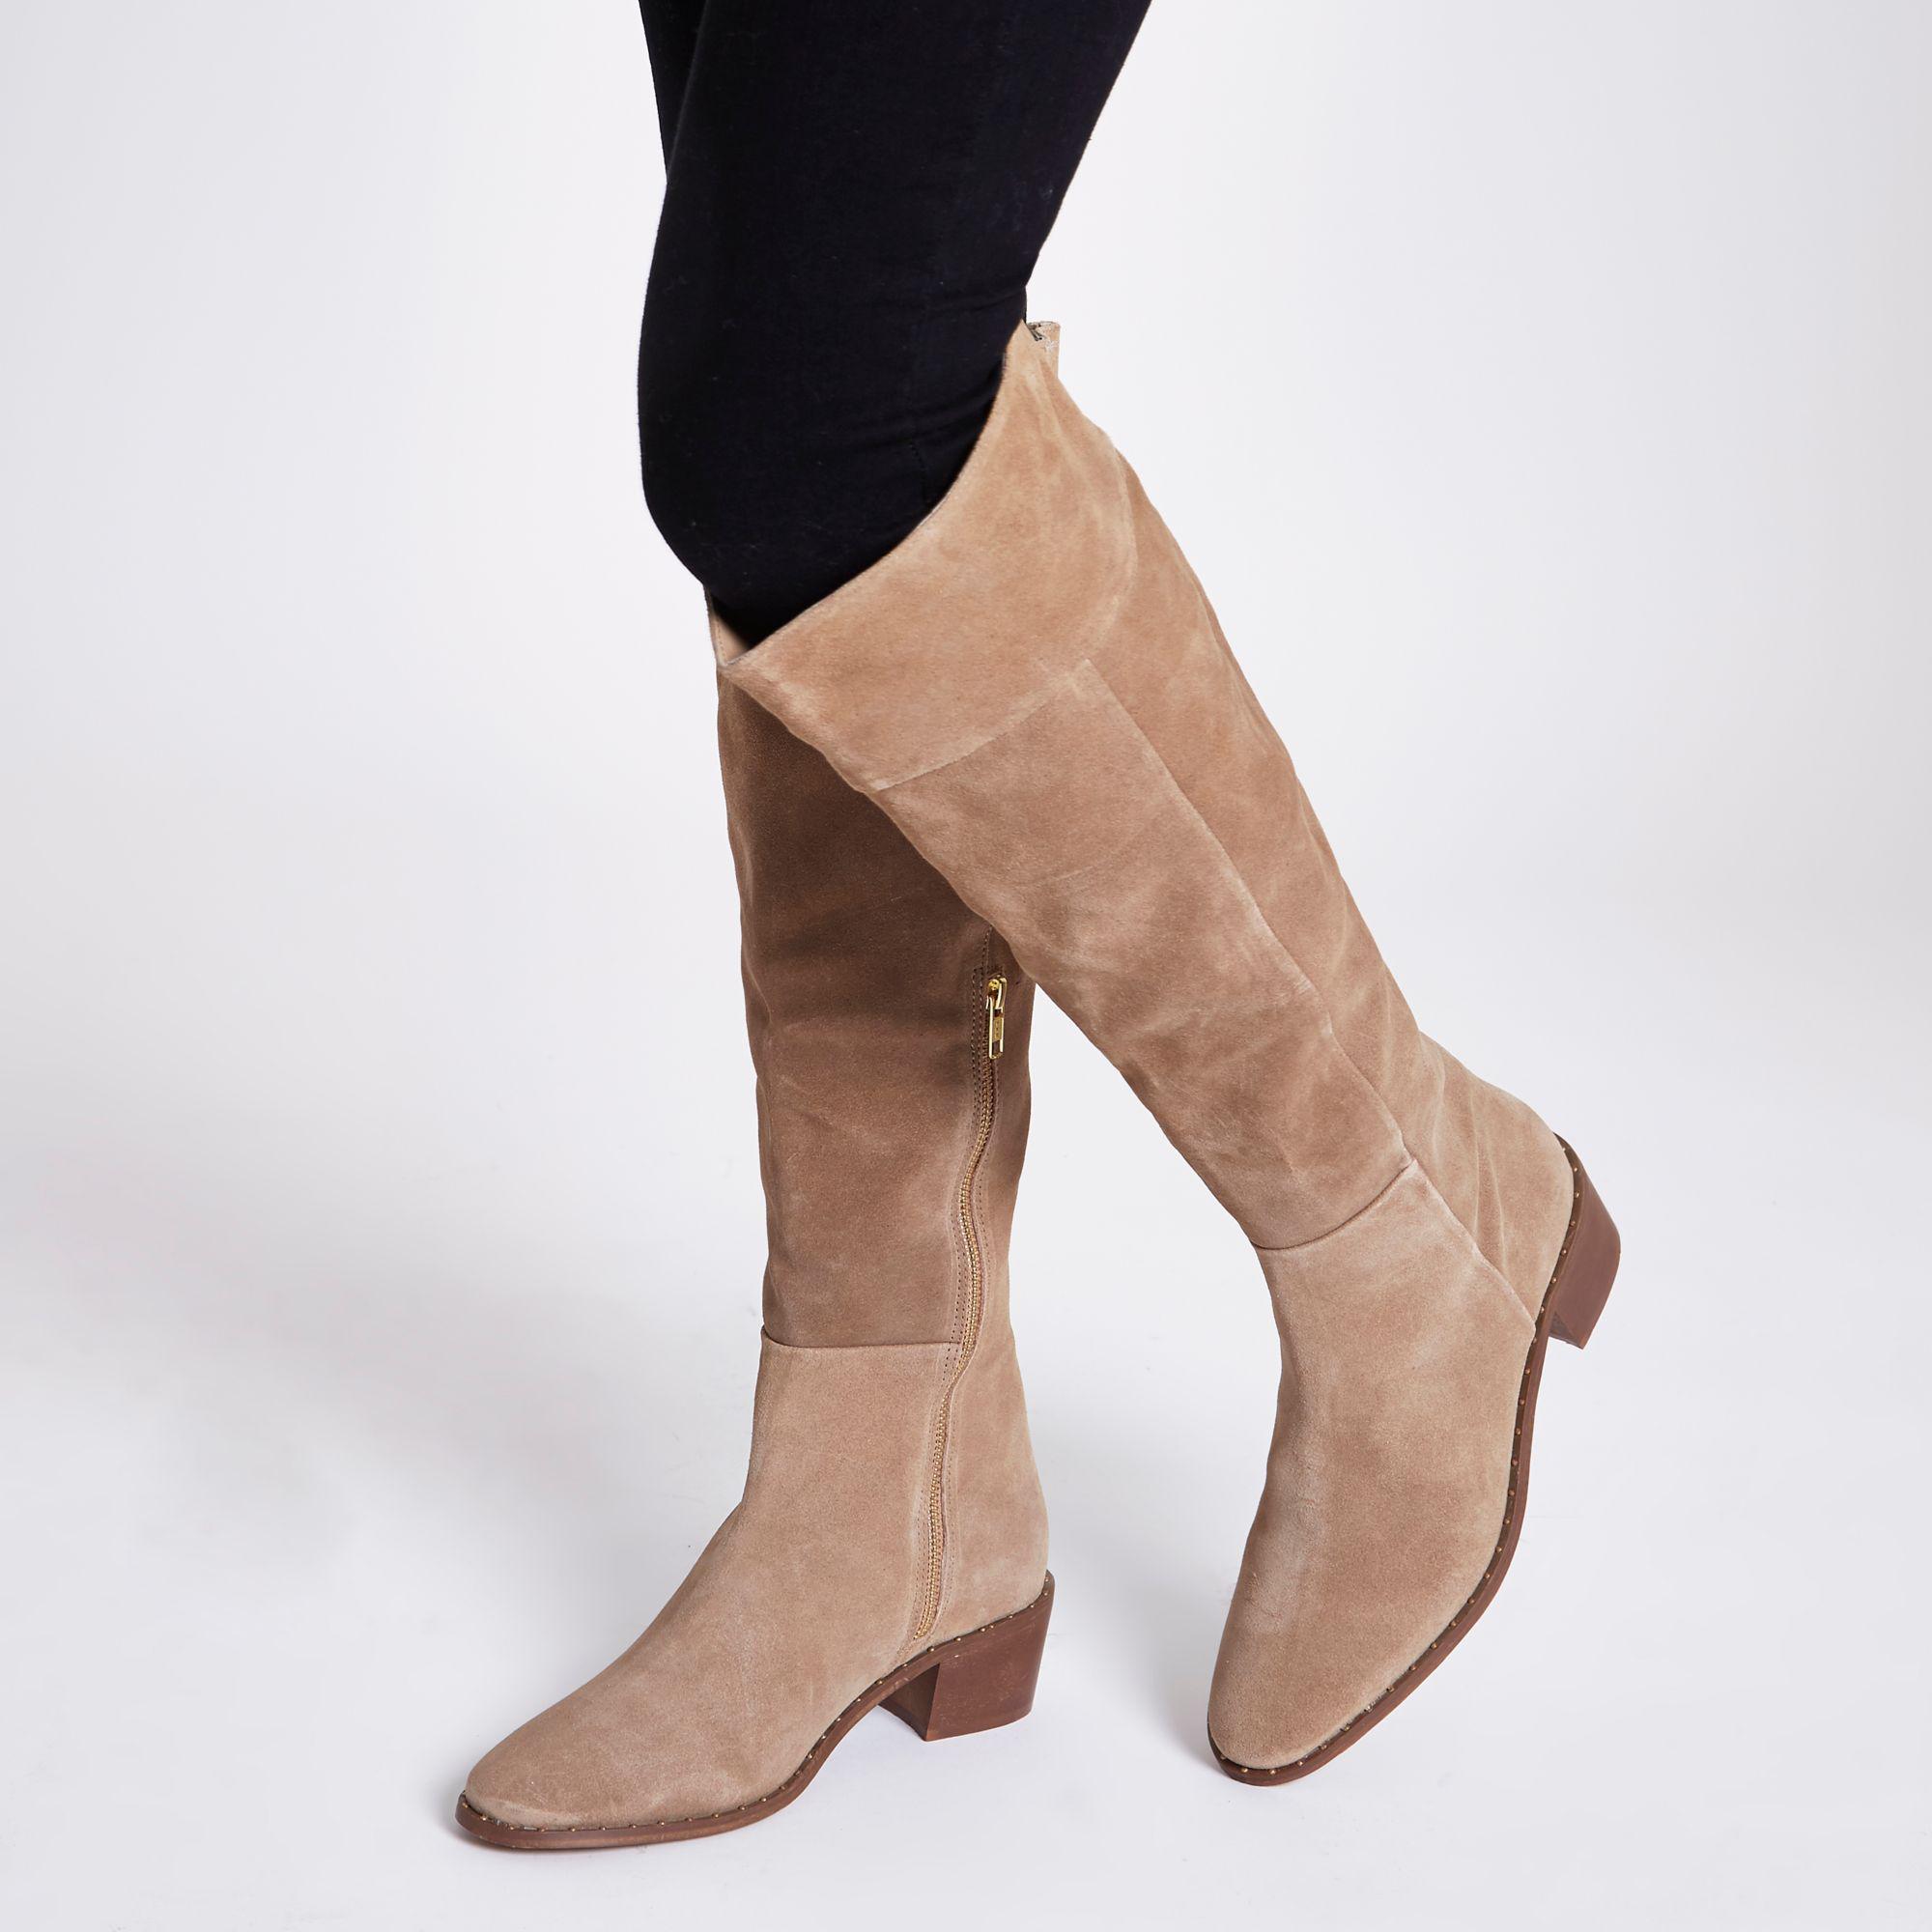 River Island Beige Suede Studded Knee High Suede Boots in Natural - Lyst